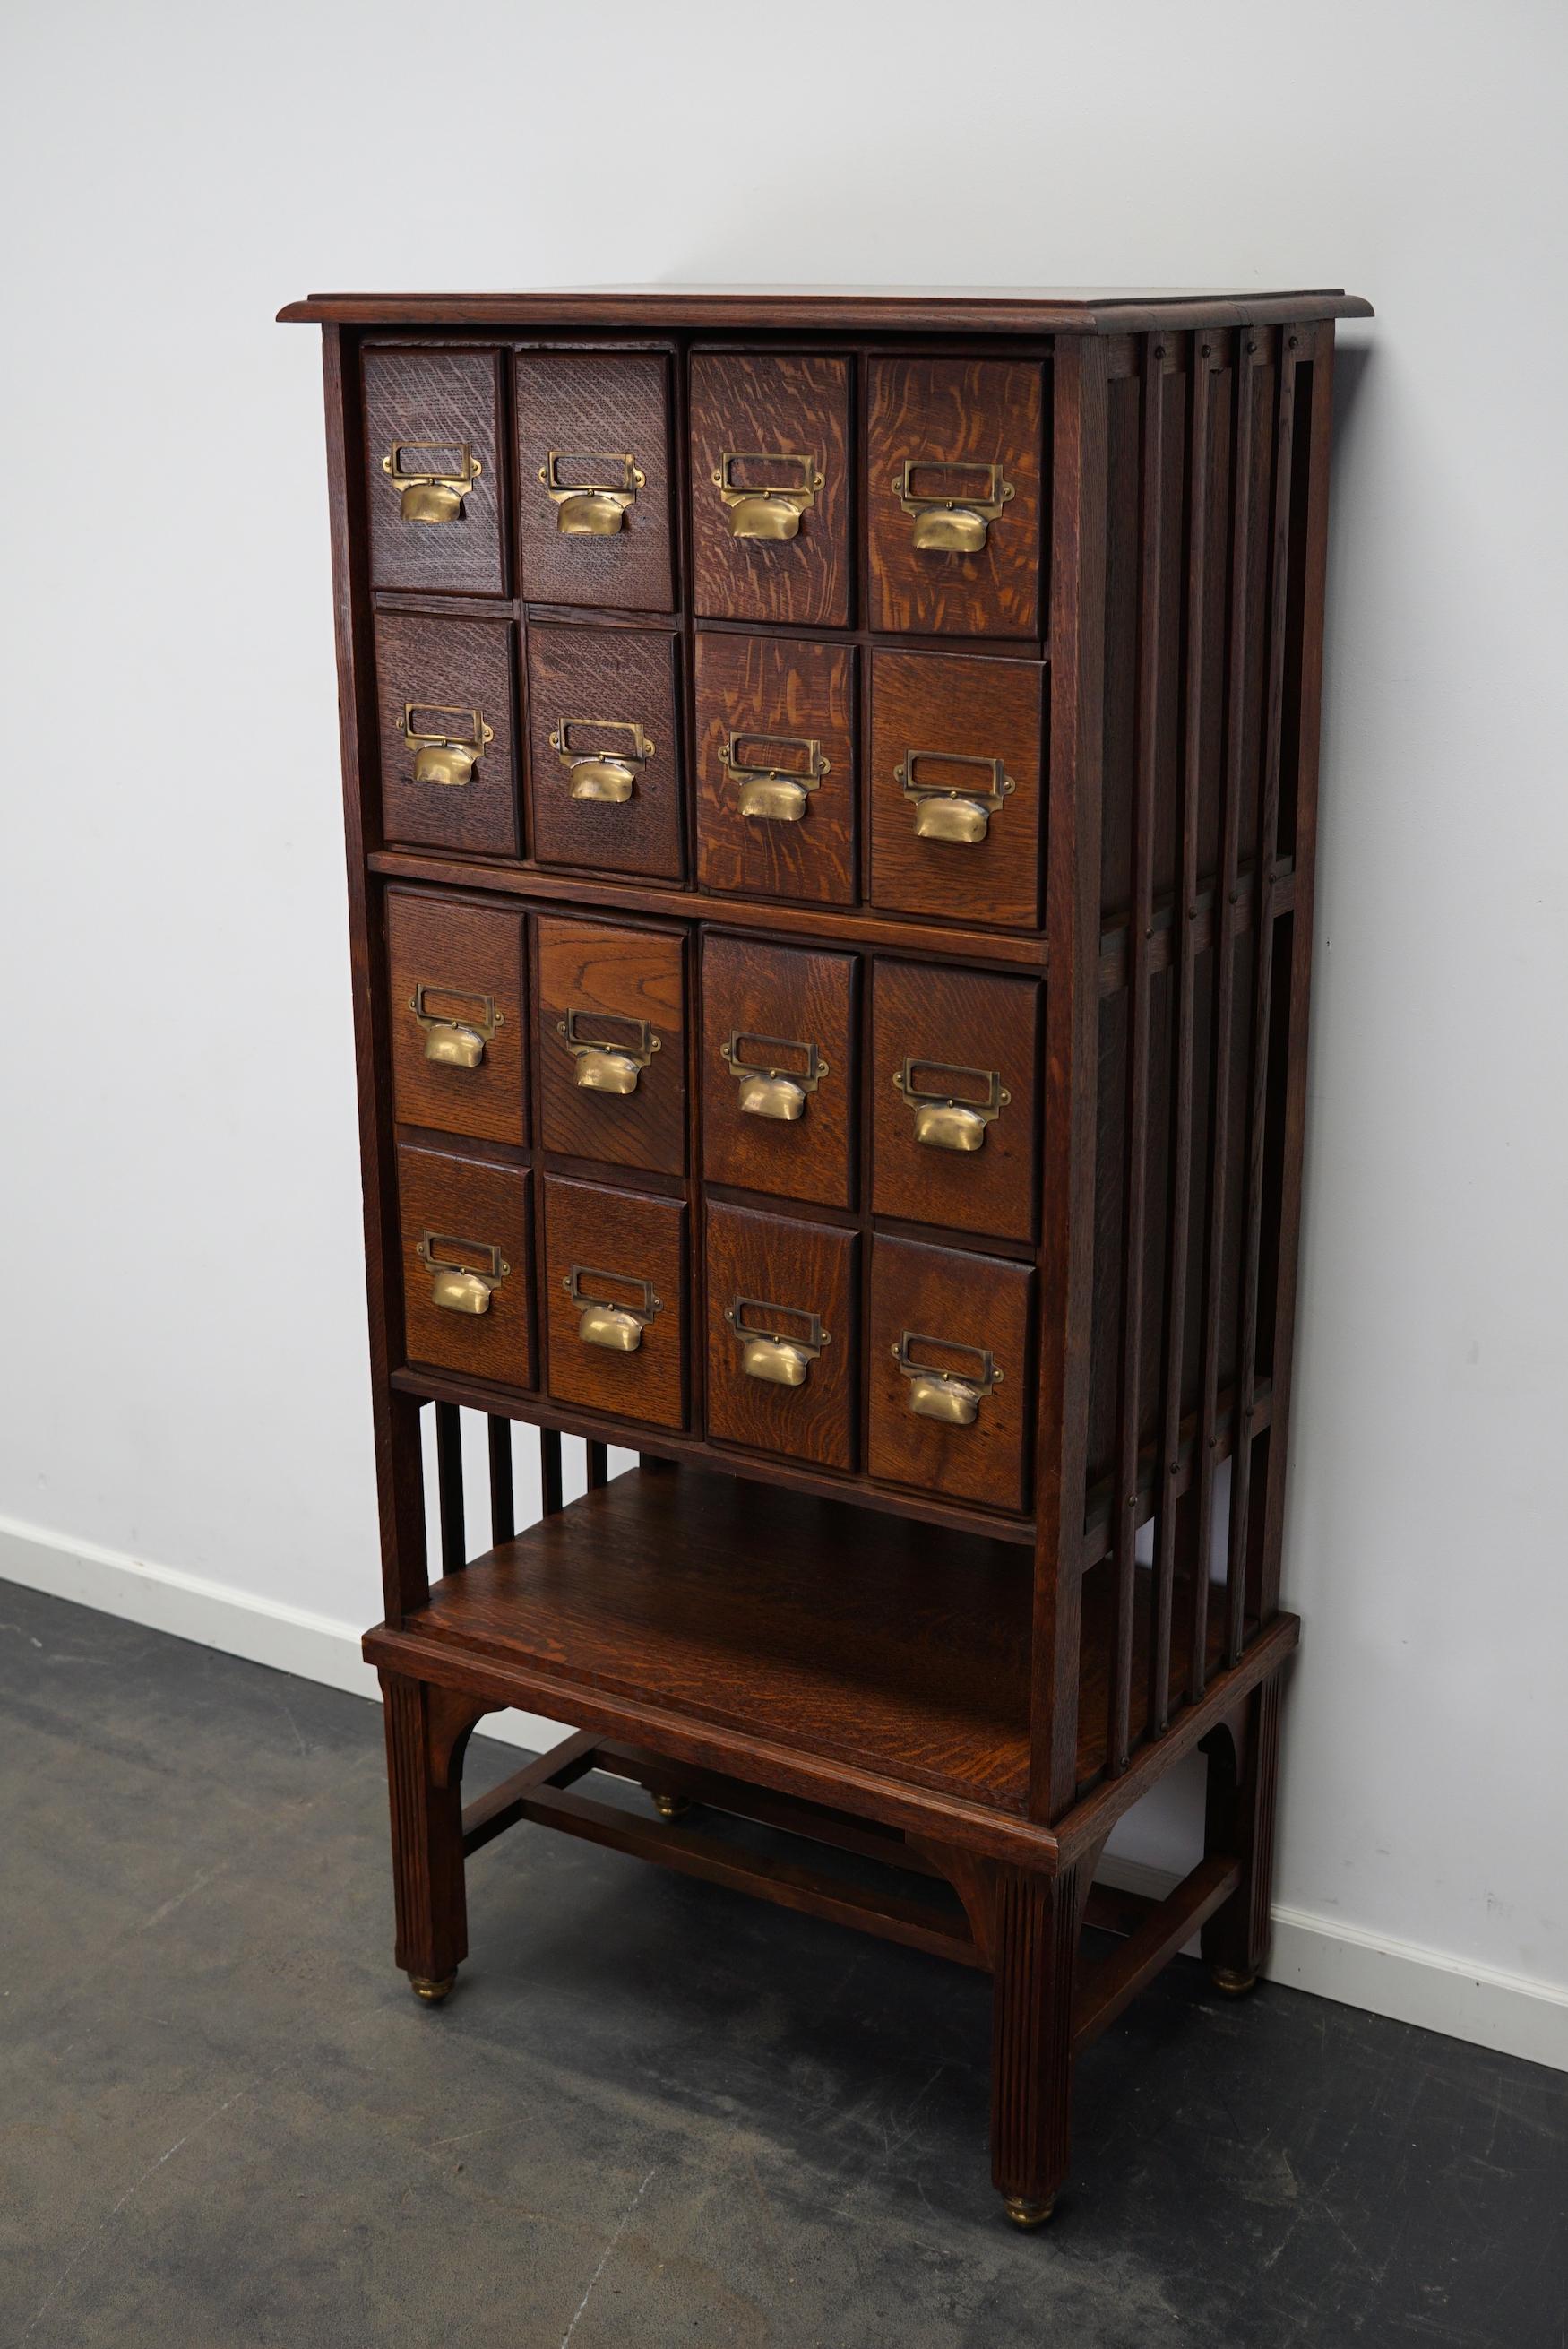 This apothecary bank of drawers / filing cabinet was designed around the turn of the century in England. The piece is made from oak with brass hardware and nice round casters.